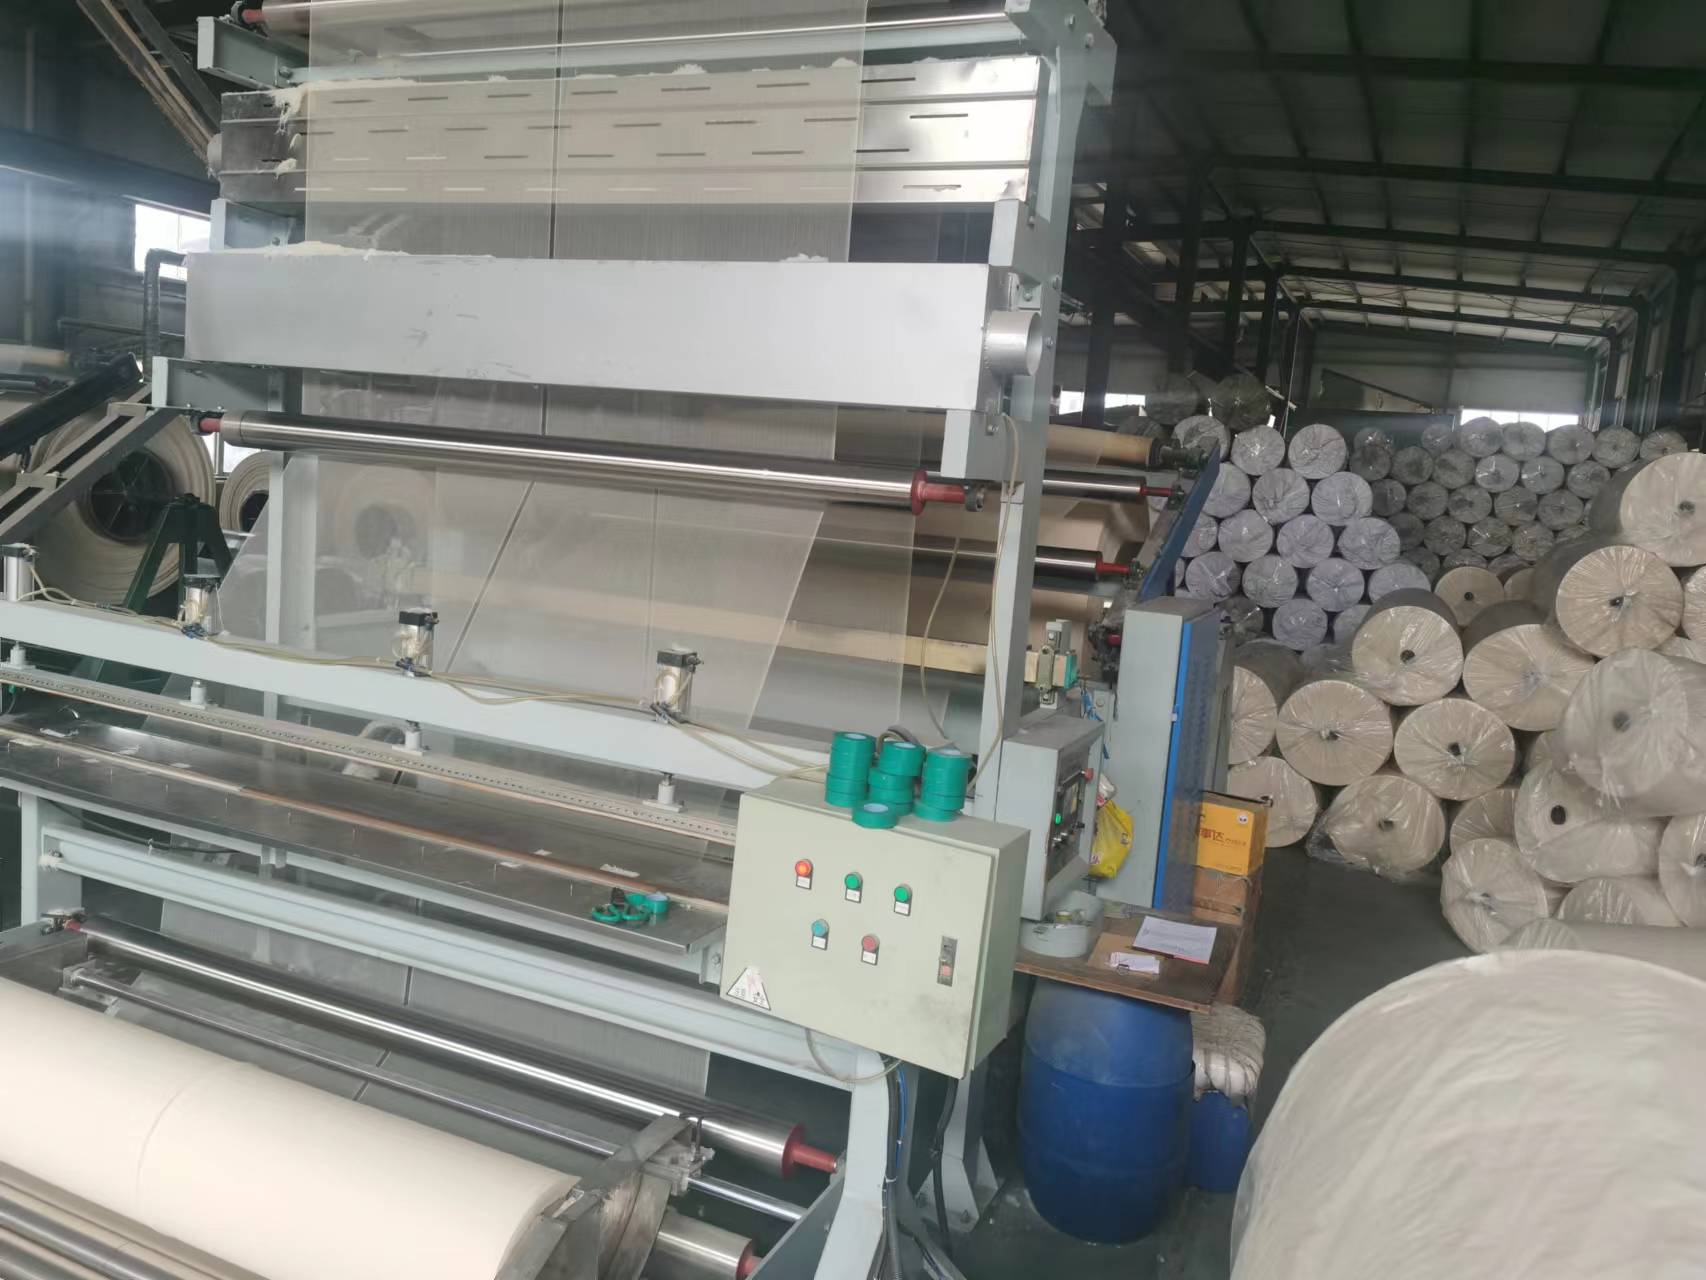 Jumbo Gauze roll to Thailand is processing production